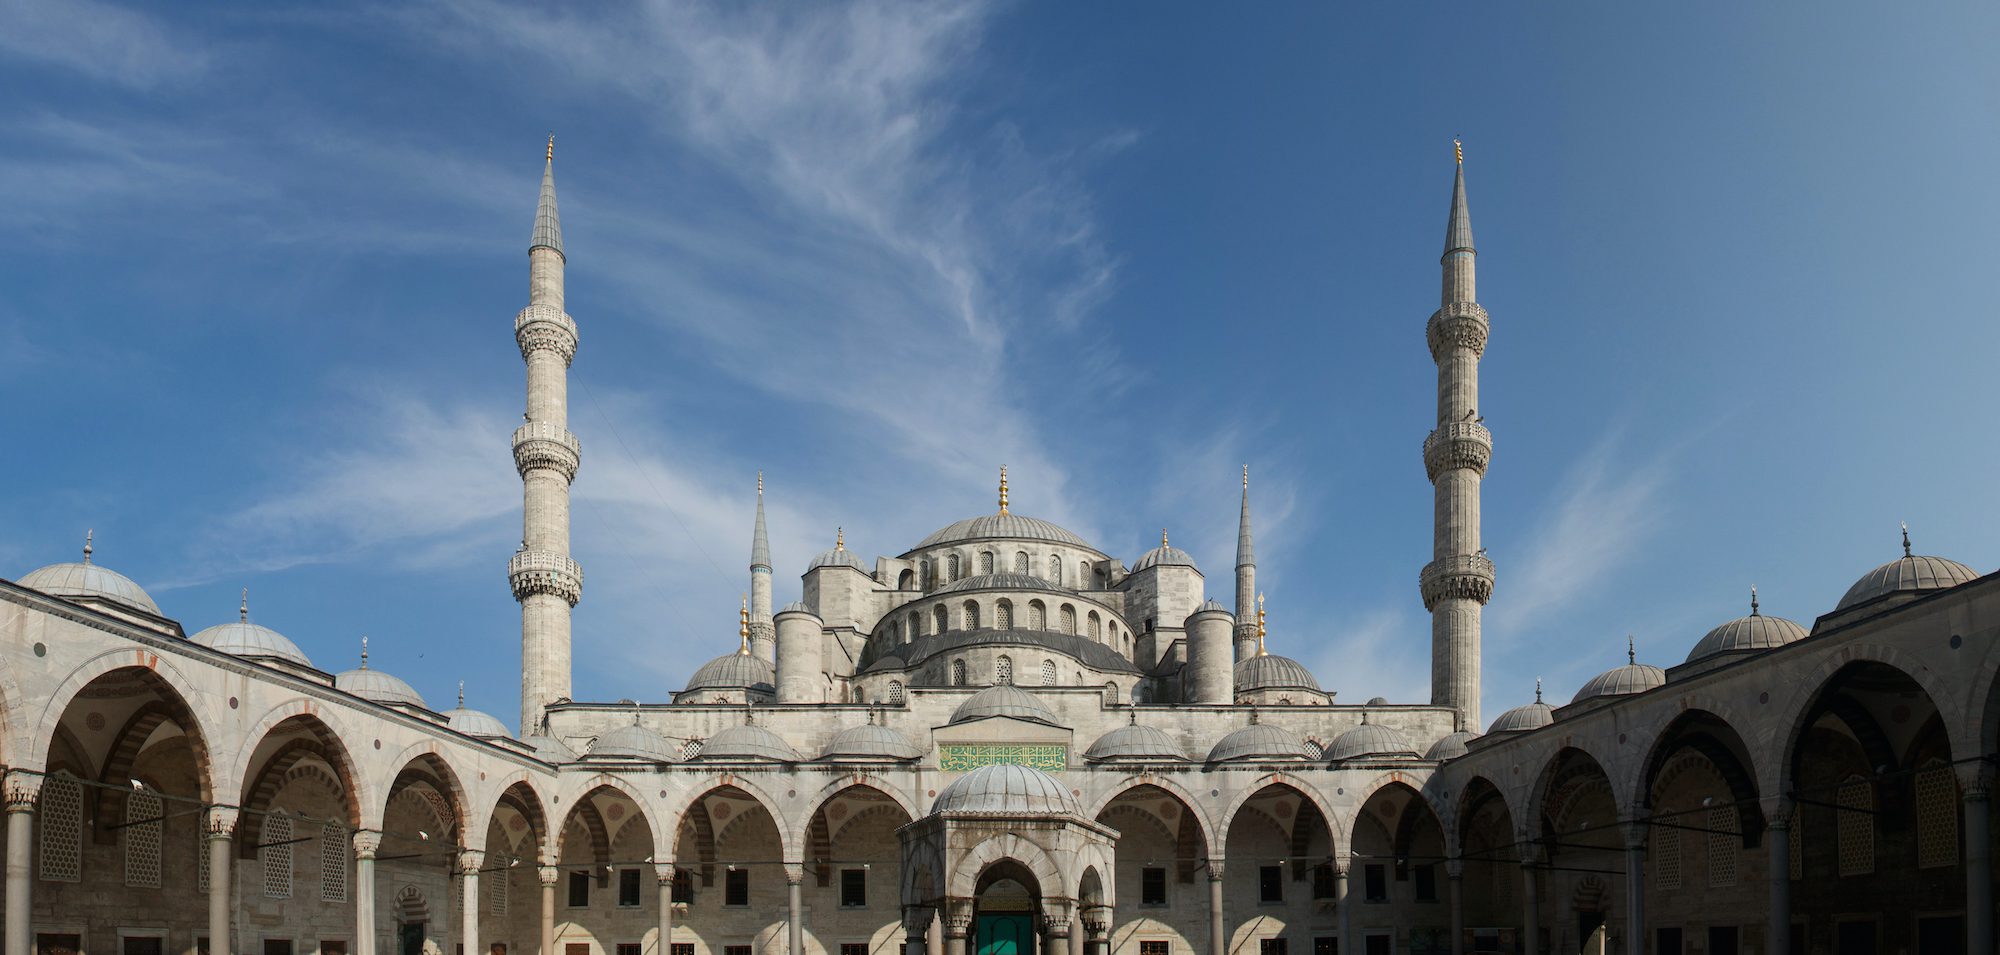 This is an image of a large, historical mosque with multiple domes and slender minarets against a clear blue sky, intricately designed with an open courtyard.